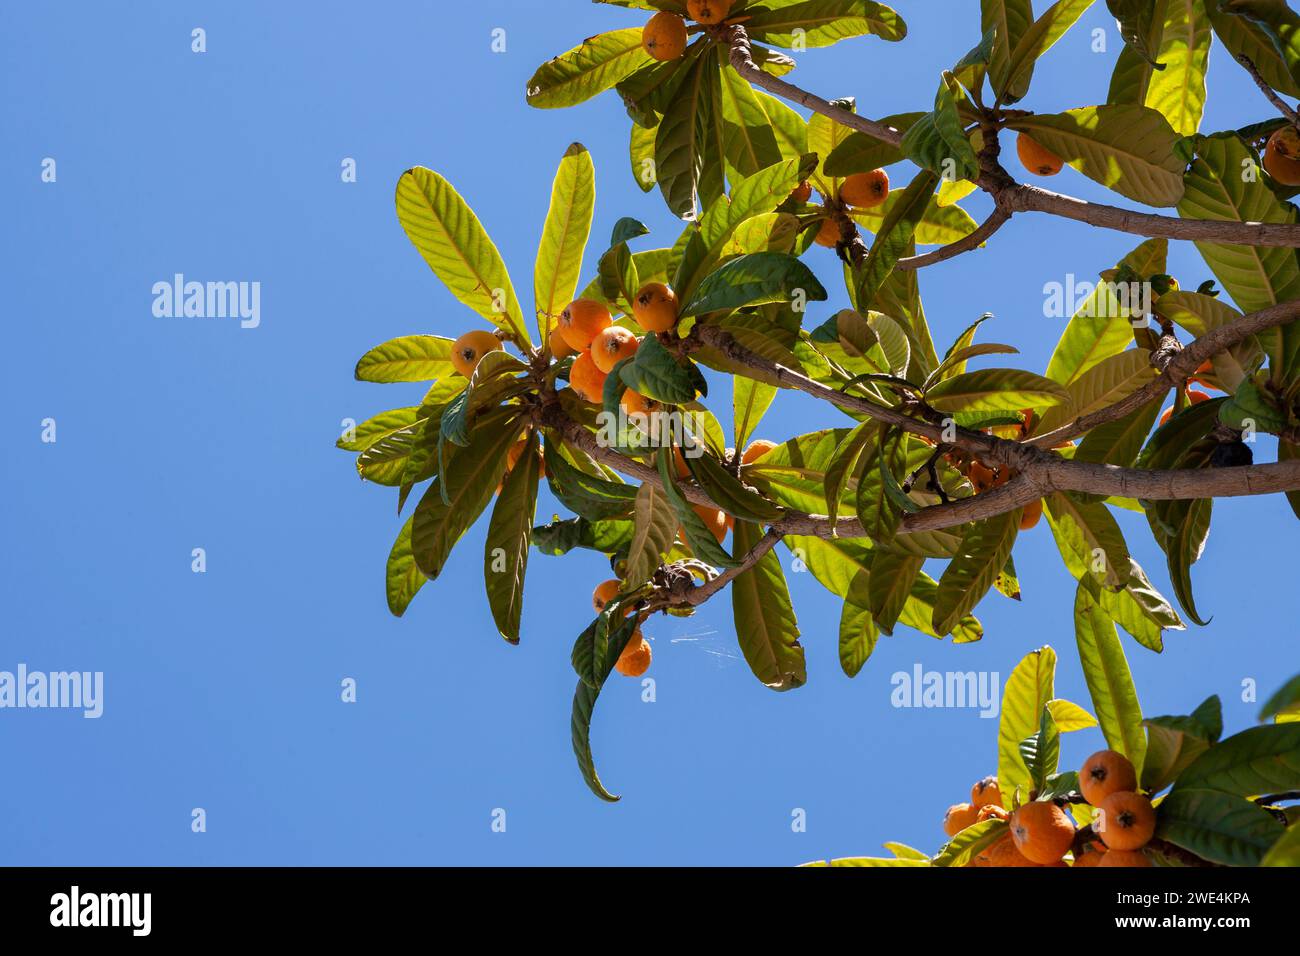 Close-up of Loquat (Eriobotrya japonica) tree: branches, leaves and fruit in Roccella Ionica, Calabria, Italy Stock Photo